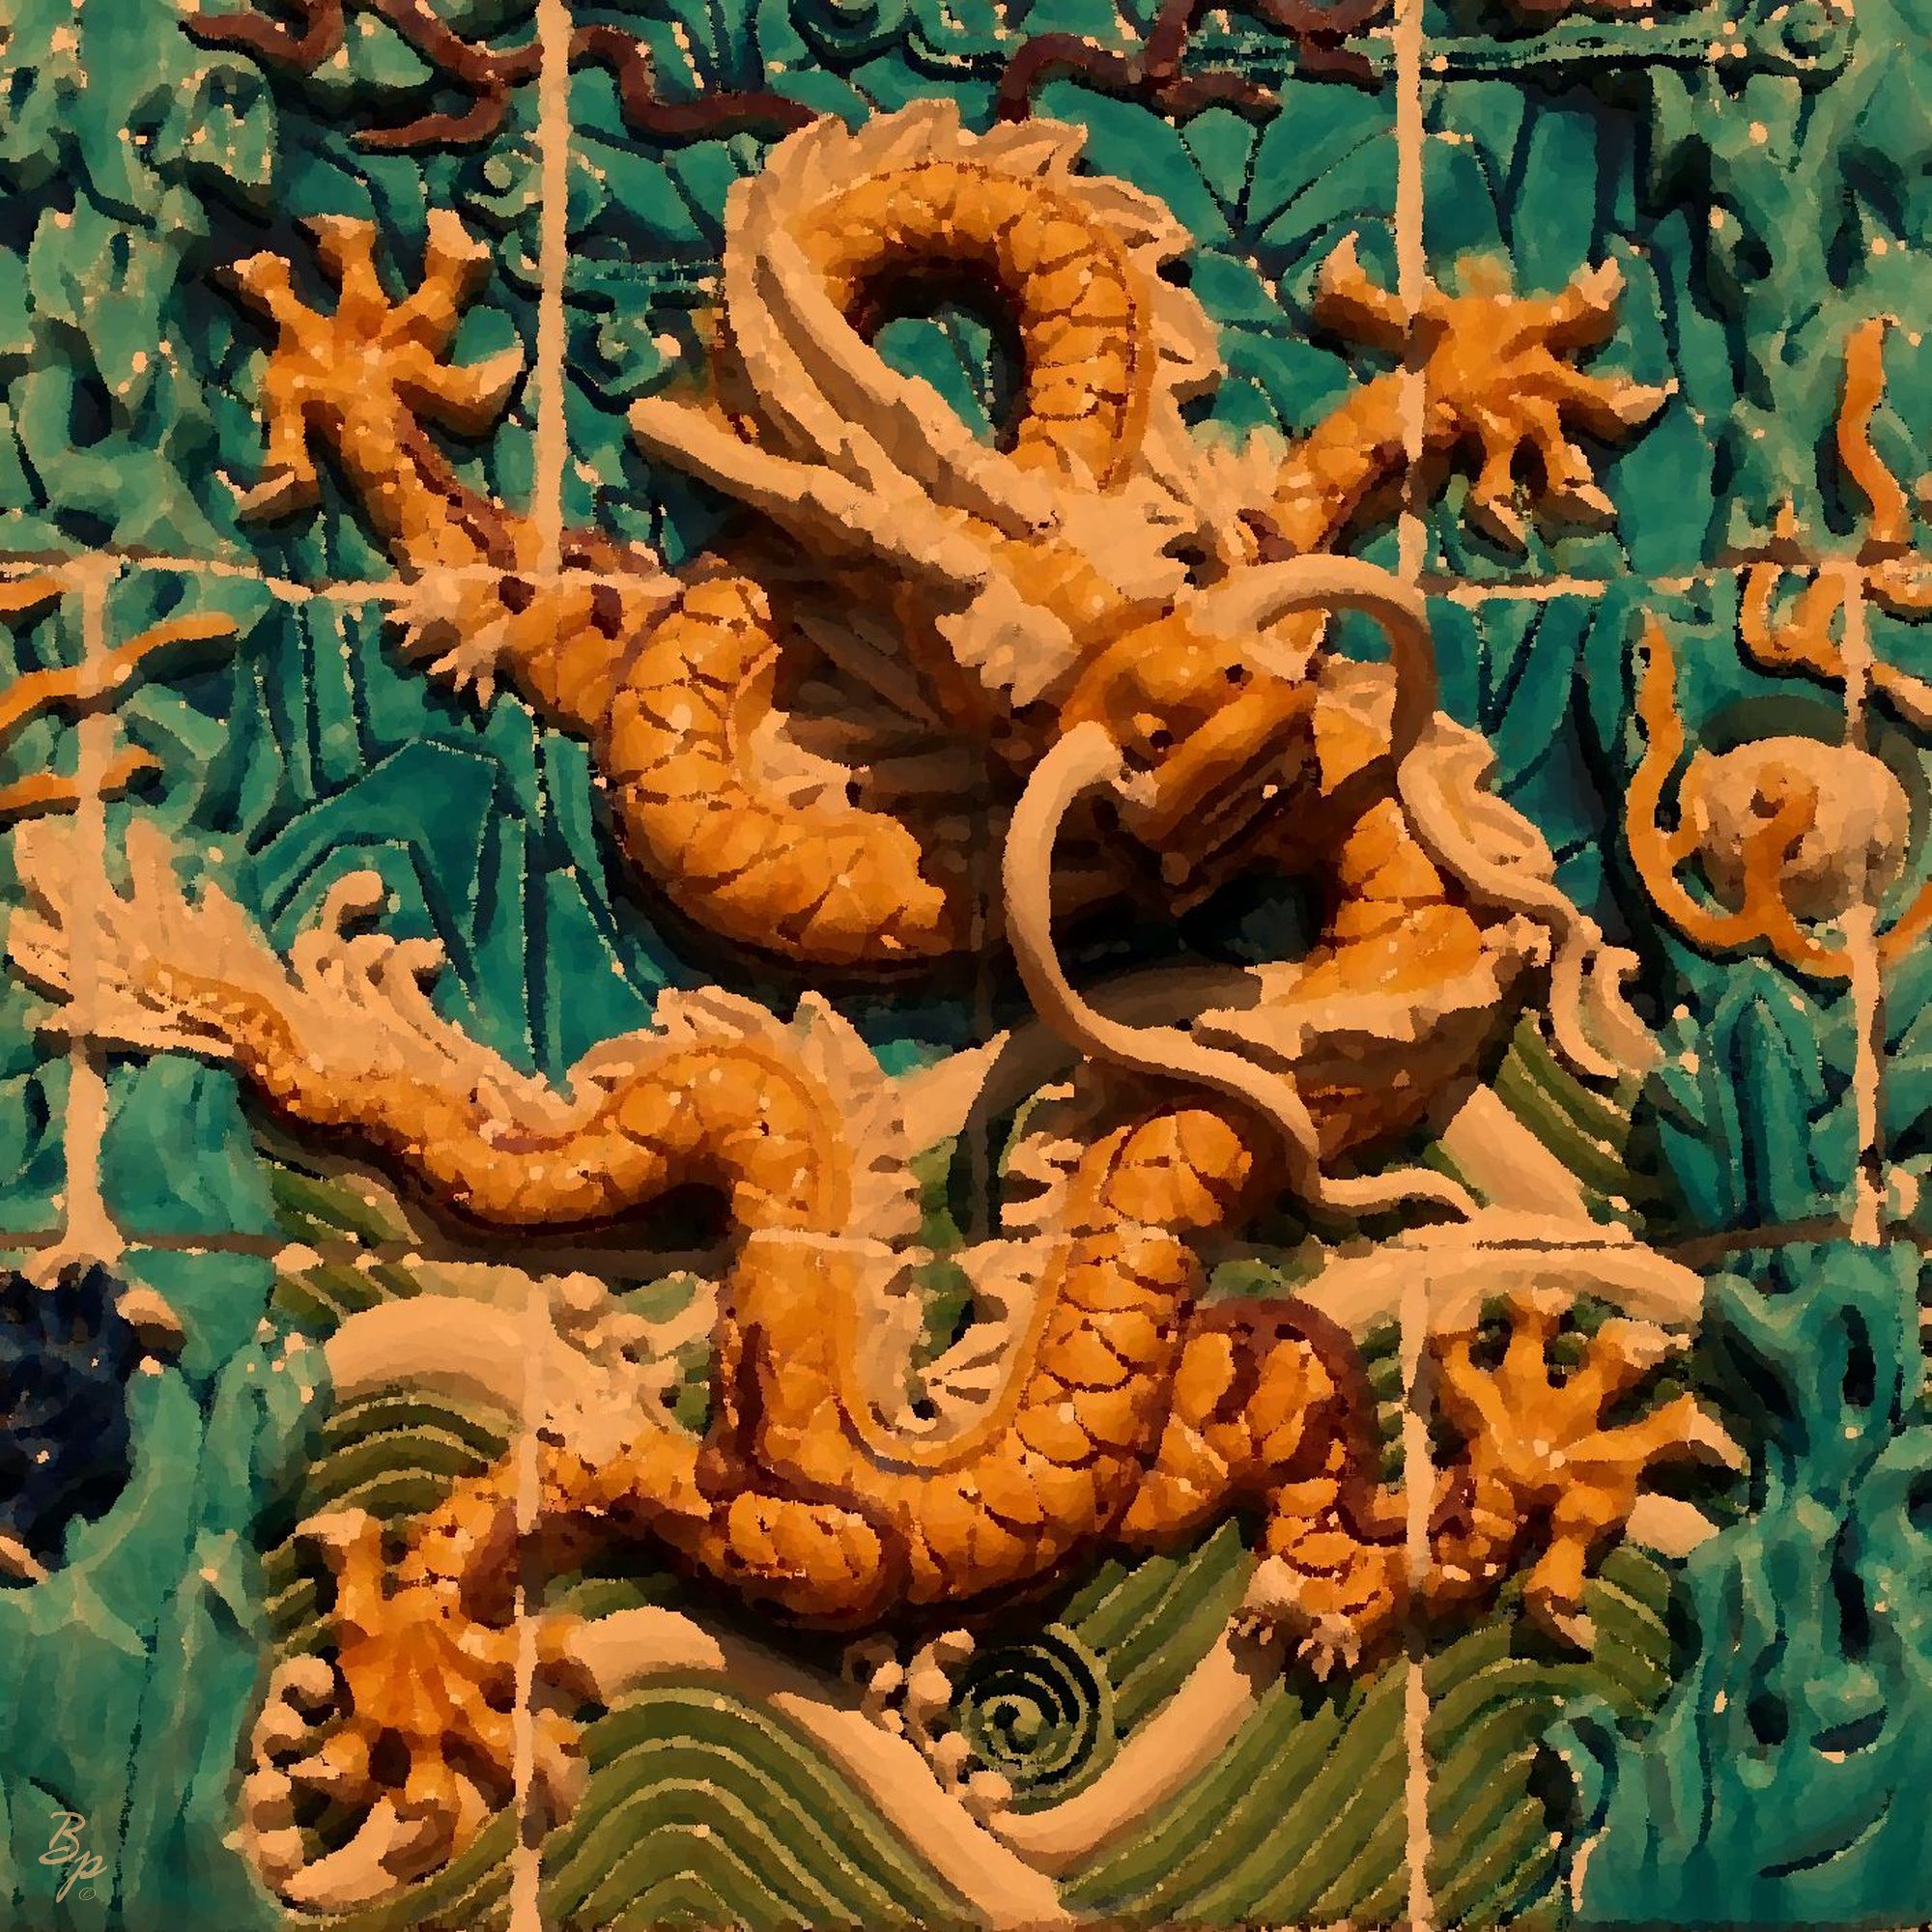 Tile Wall sculpture, street art, as positioned by entrance to China Town, put through the filter, this would be the image easiest to delete from the page, though the effect completely removes the 3D quality of the original, and gives it a fantasy art vibe